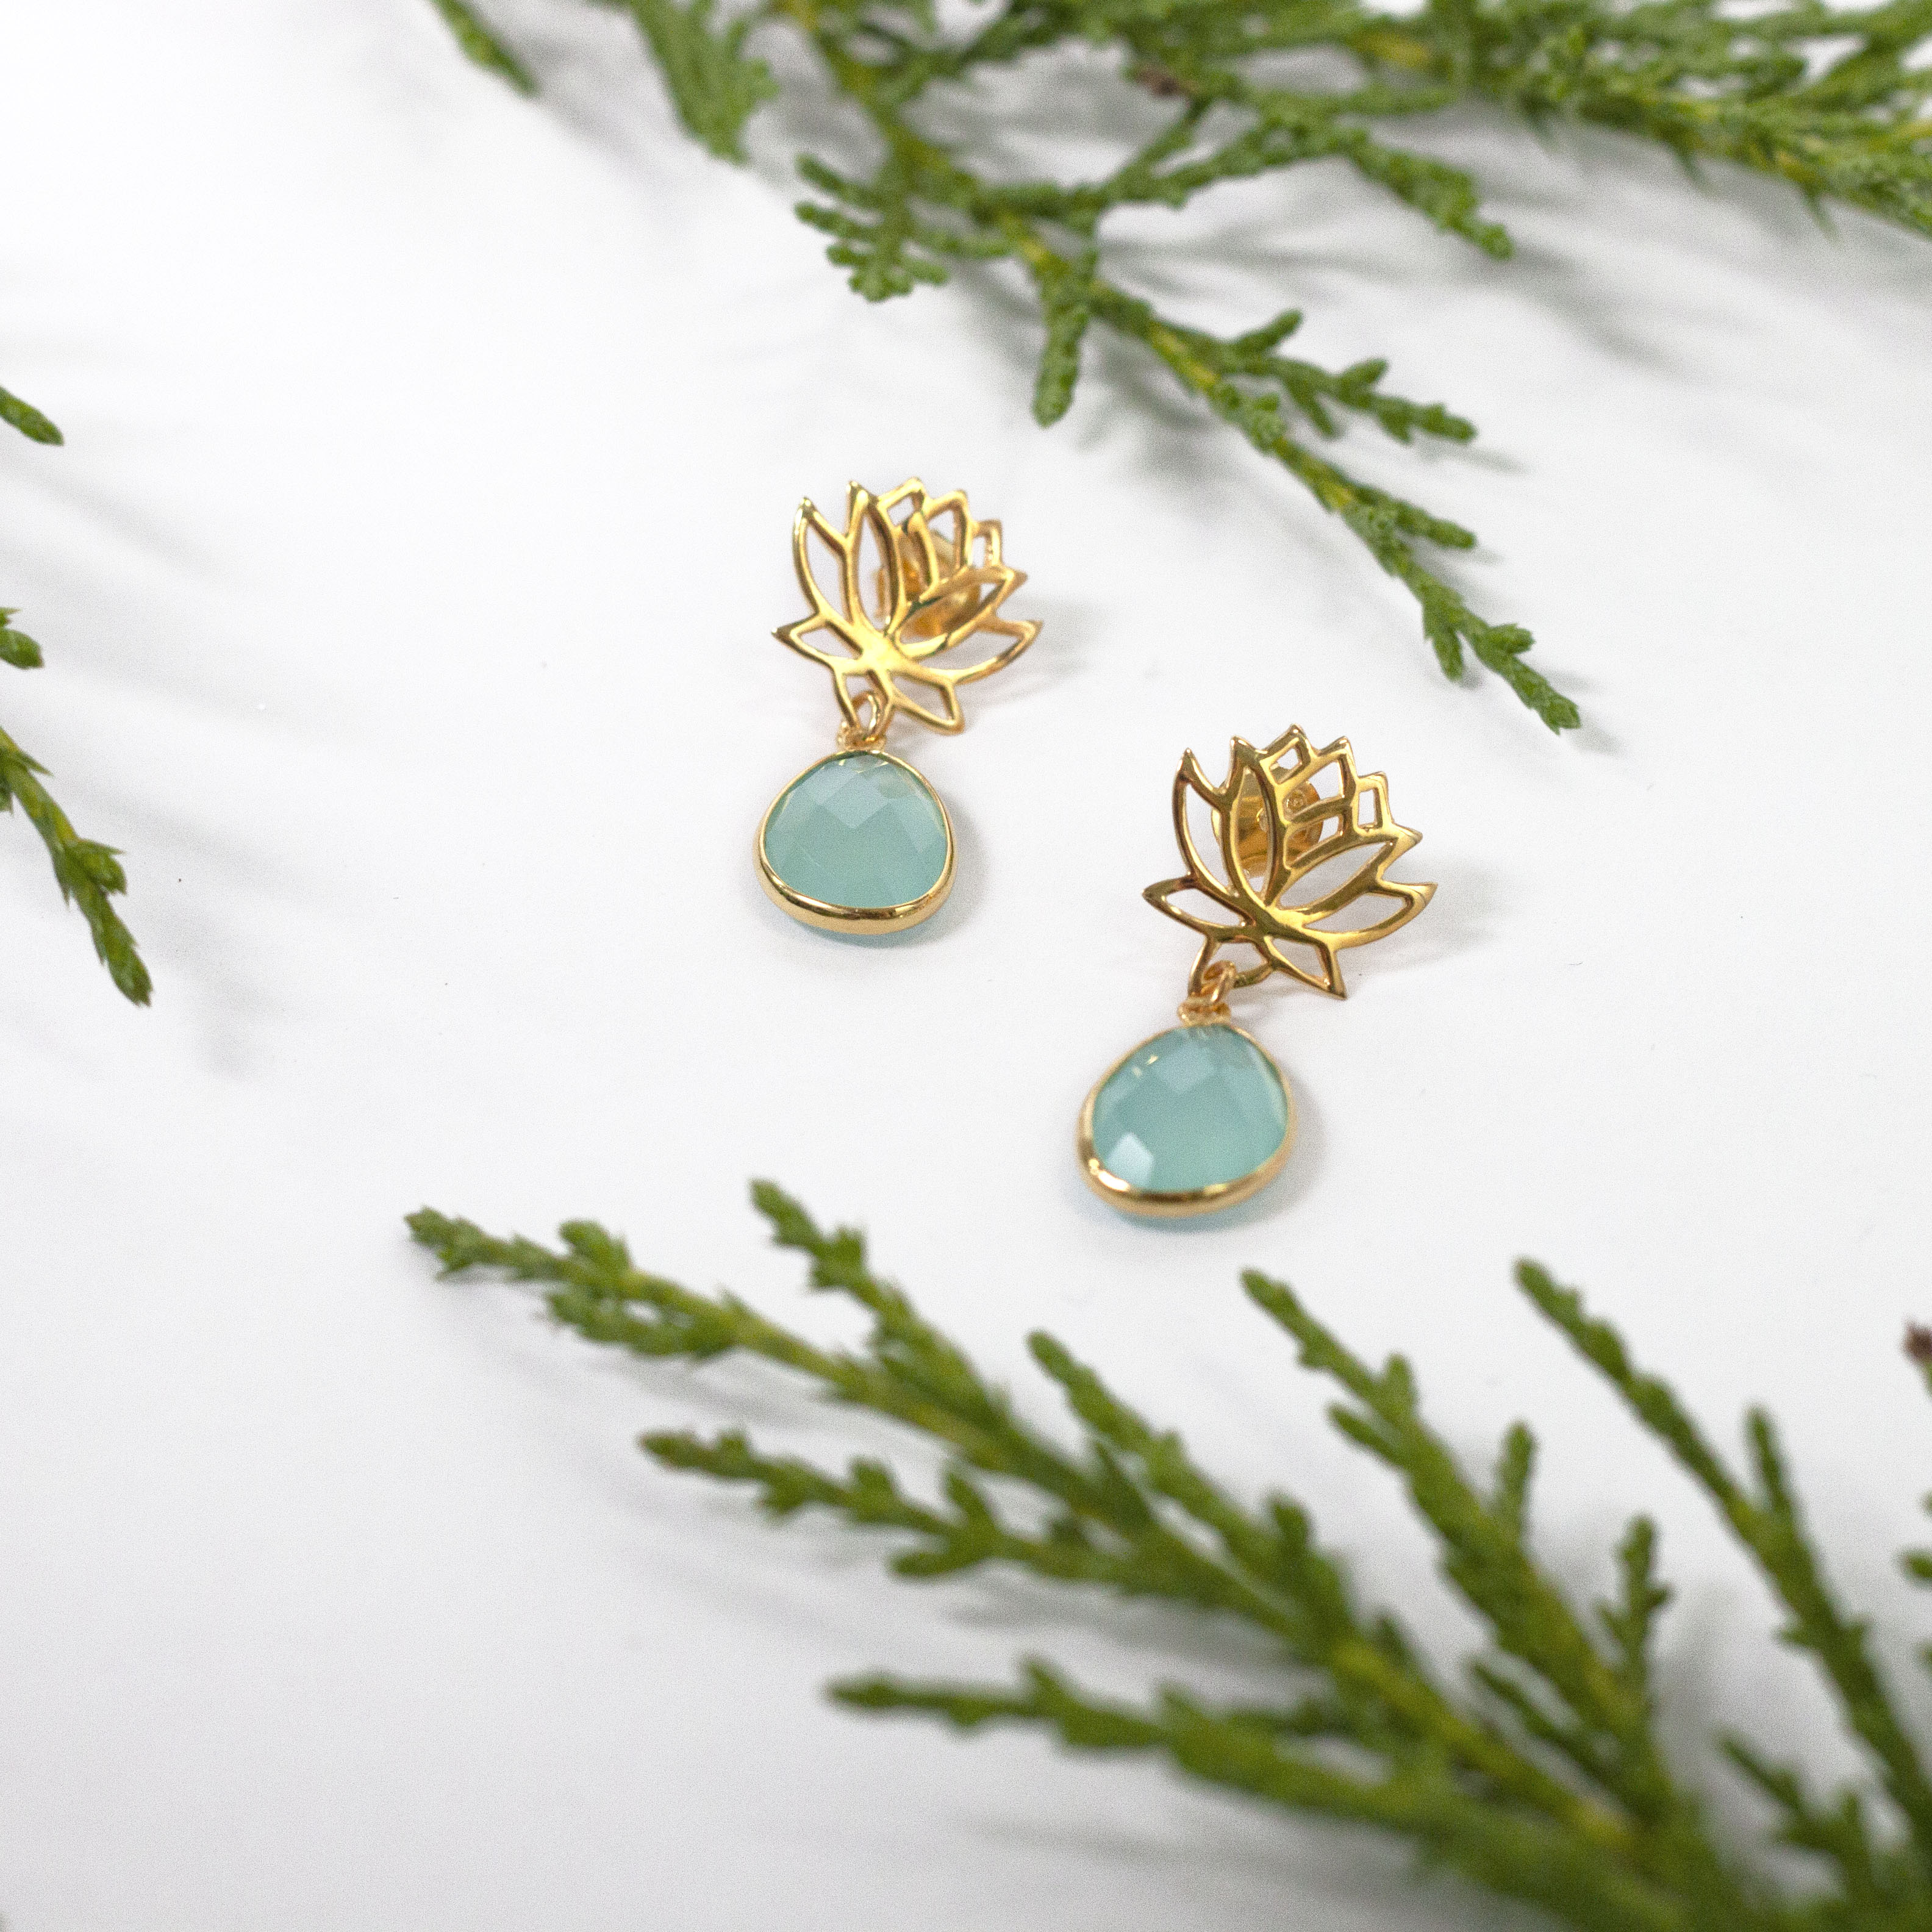 Lotus Earrings in Gold Plated Sterling Silver with an Aqua Chalcedony Gemstone Drop